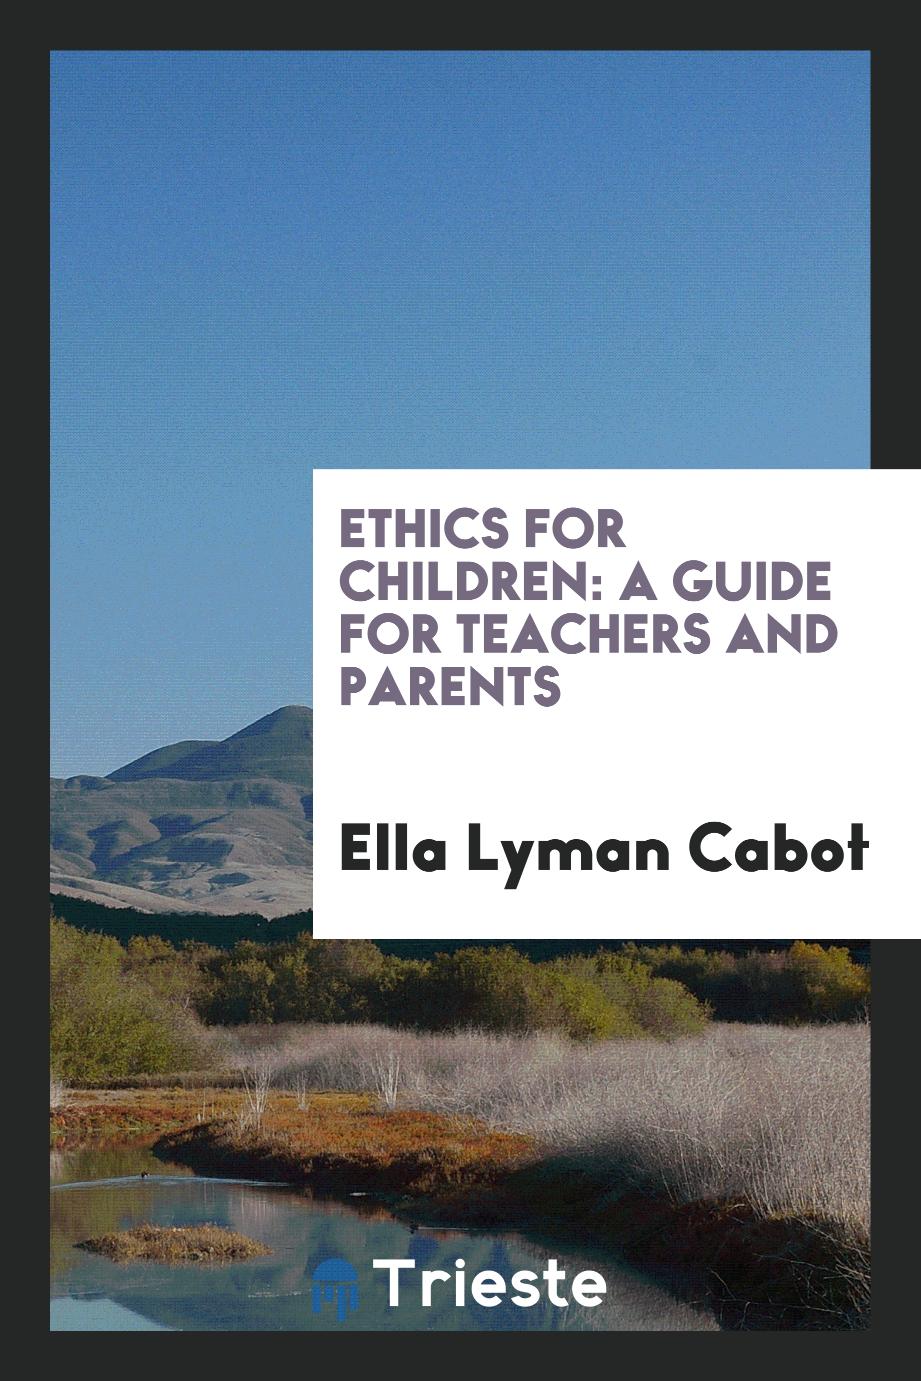 Ethics for children: a guide for teachers and parents